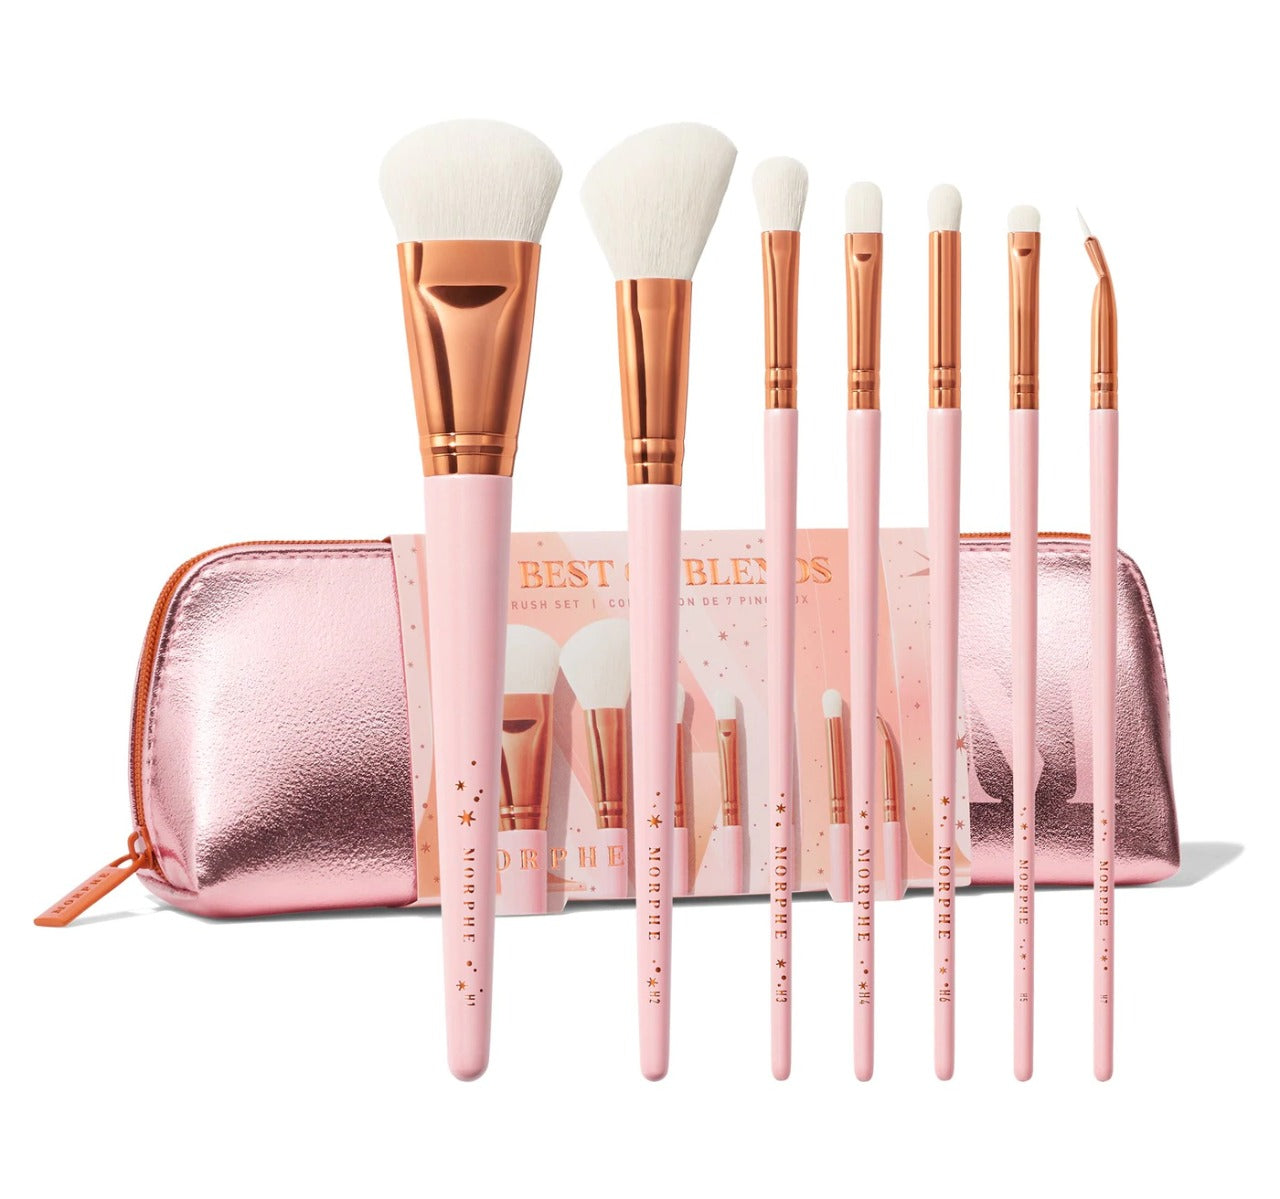 THE BEST OF BLENDS 7-PIECE BRUSH SET The Best Of Blends 7-Piece Brush Set